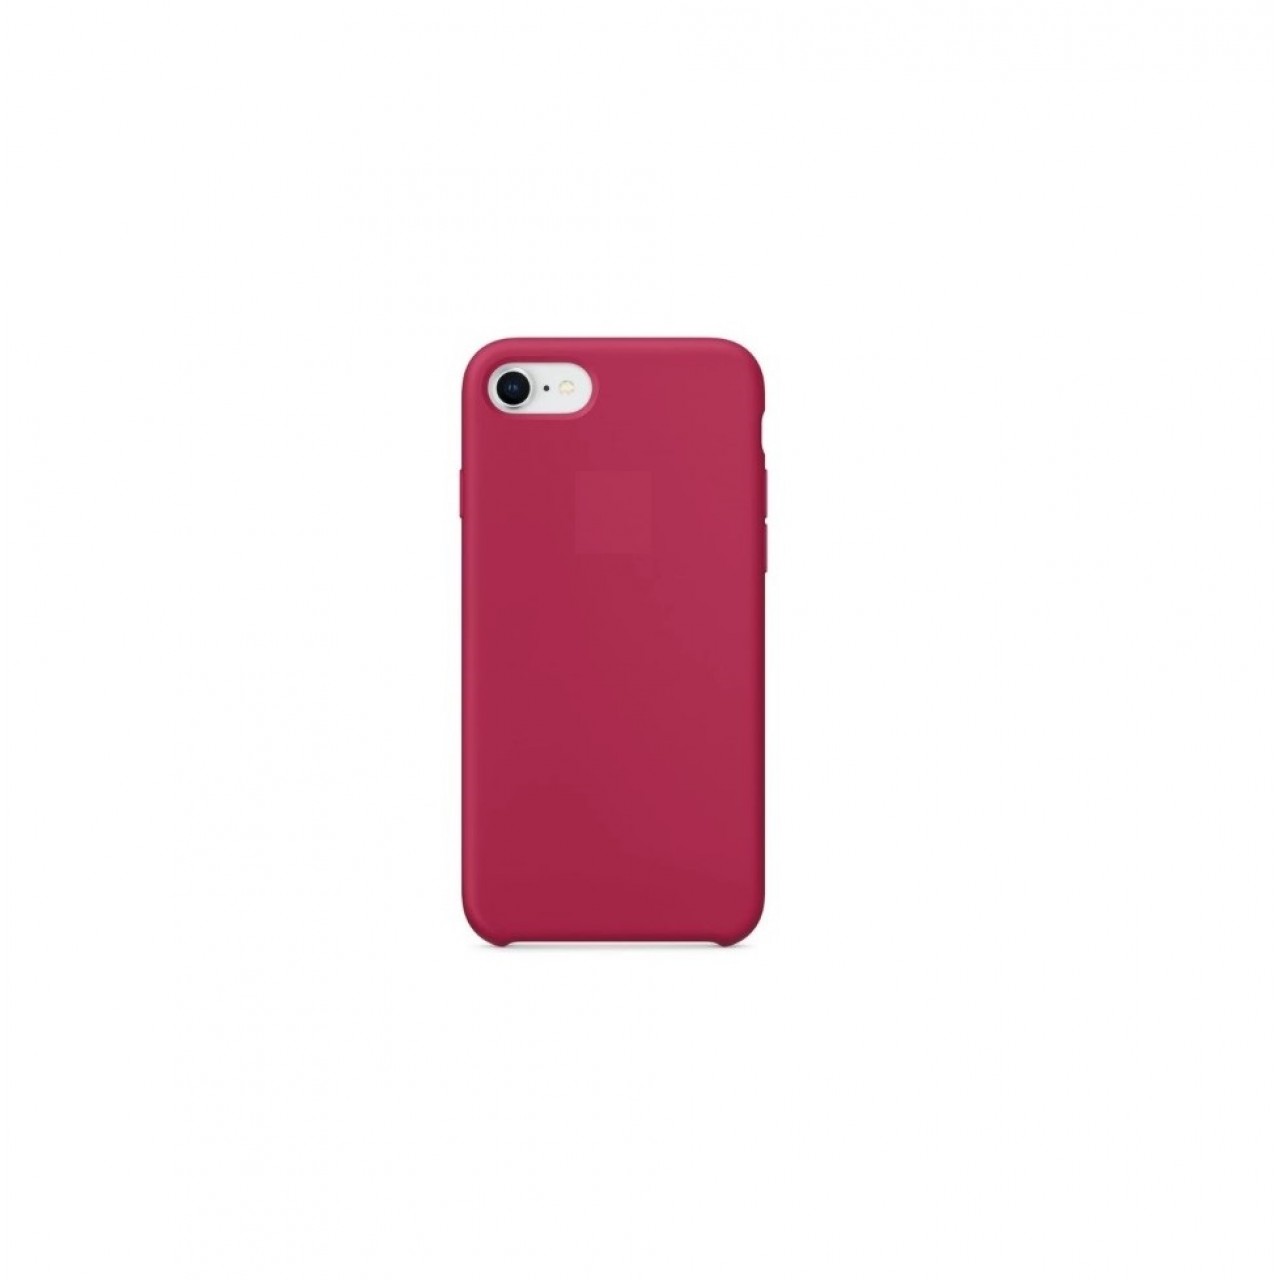 iPhone 6 Plus Θήκη Σιλικόνης - Mobile Back Case Silicone Rose Red